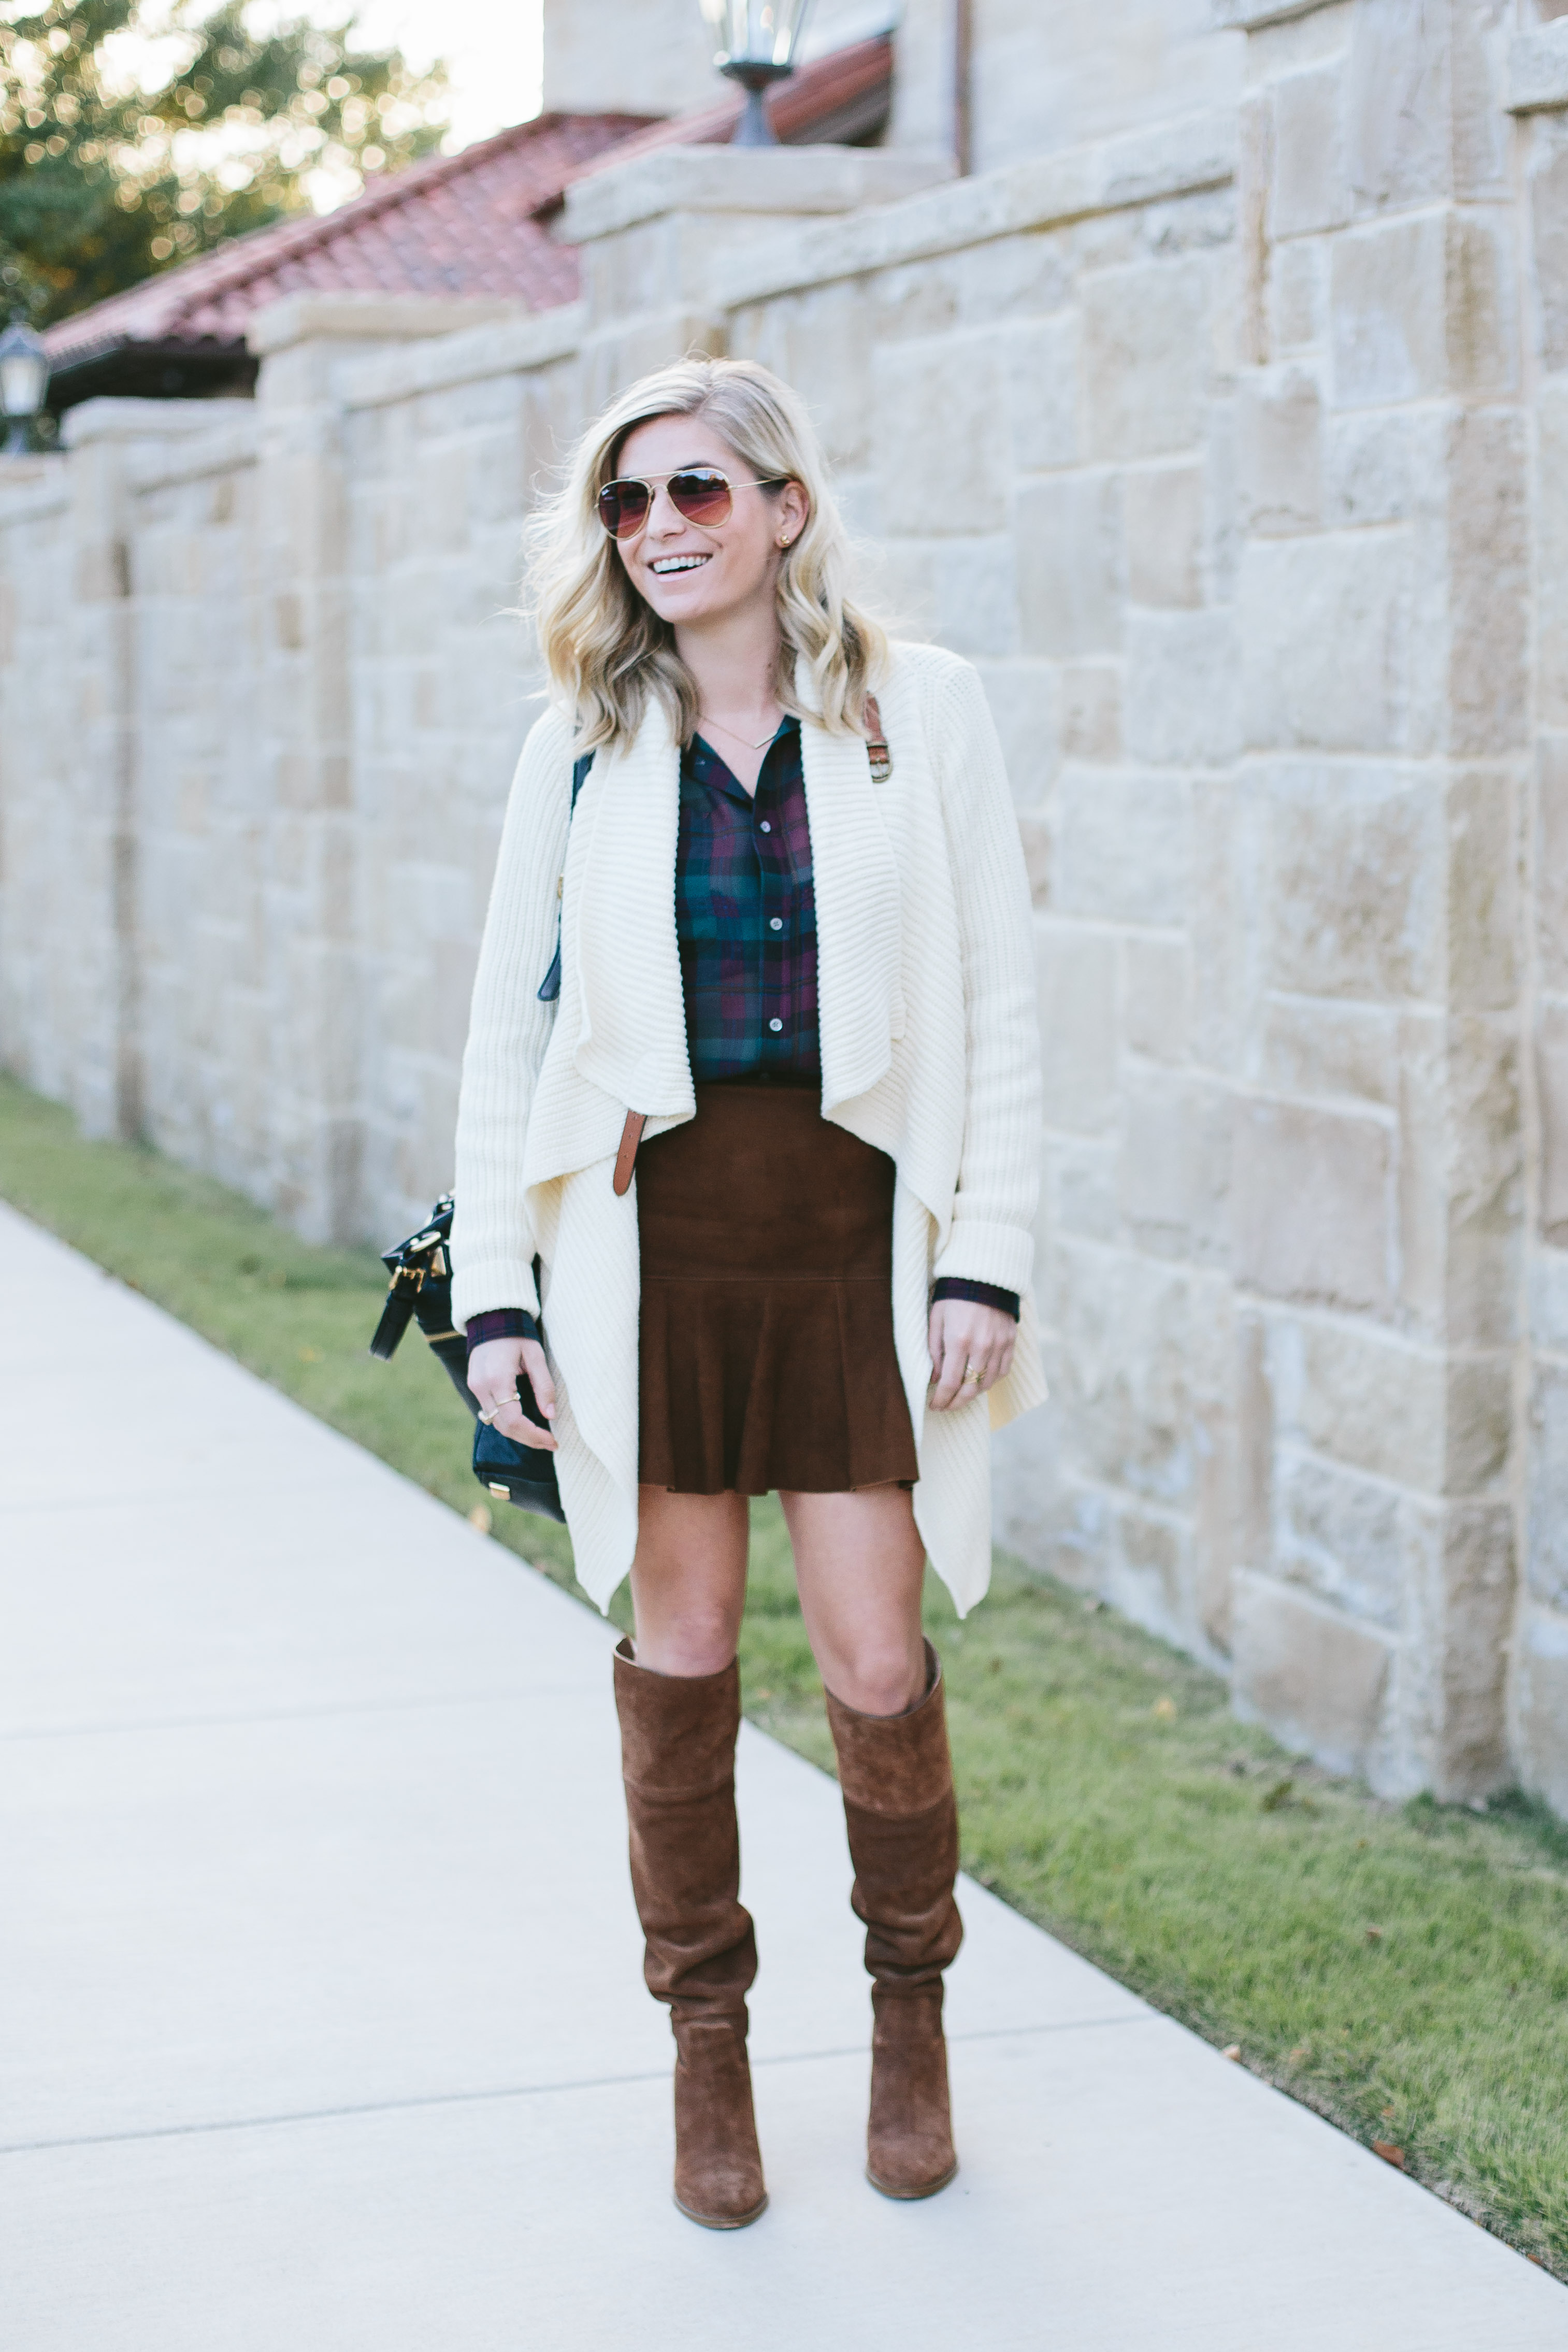 polo ralph lauren outfit-black friday sales-suede mini skirt with plaid shirt and sweater cardigan-fall outfit inspiration-thanksgiving outfit idea-dallas fashion blogger